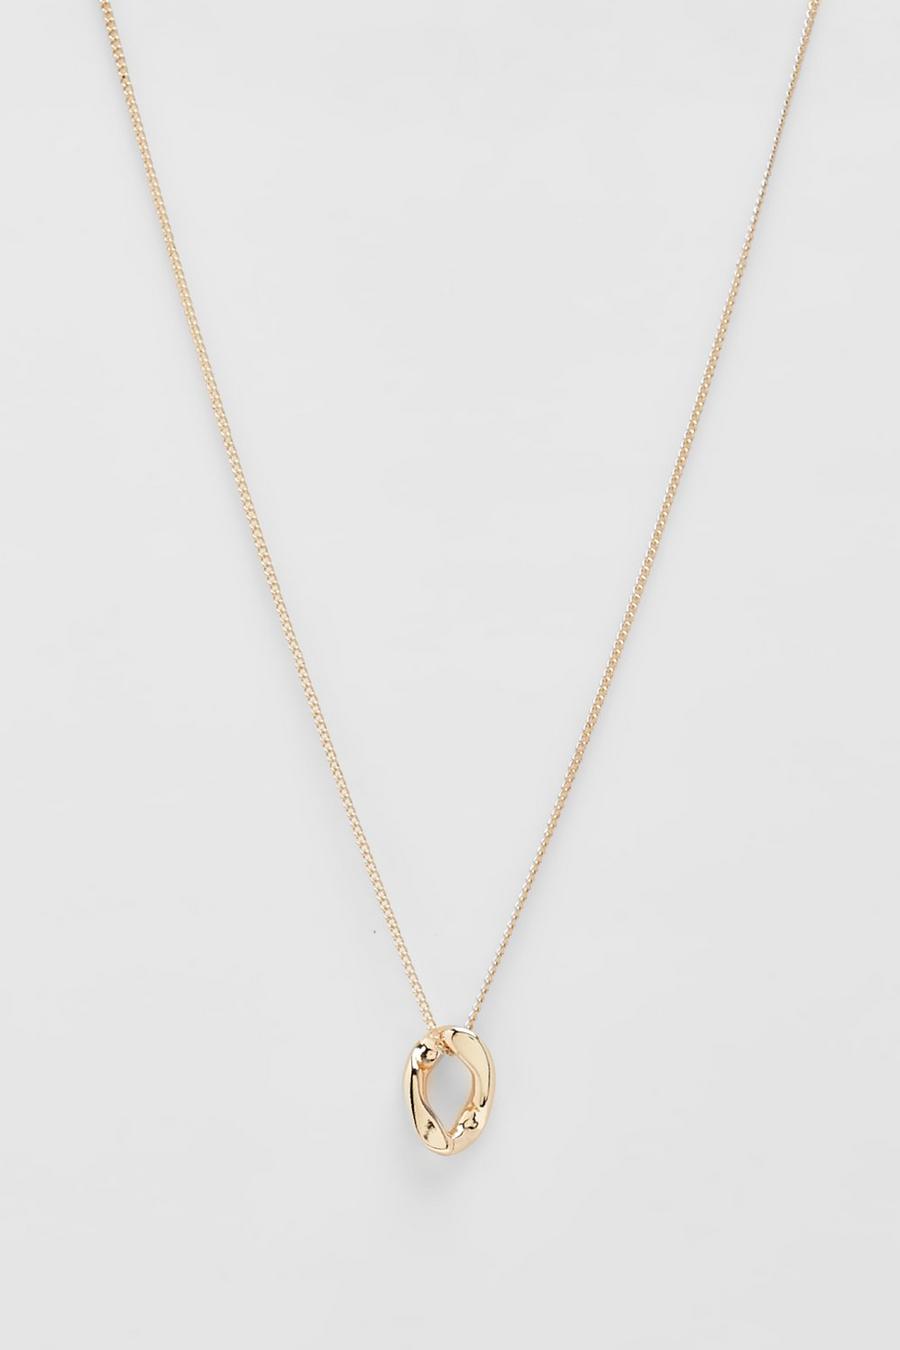 Gold Hammered Oval Drop Necklace